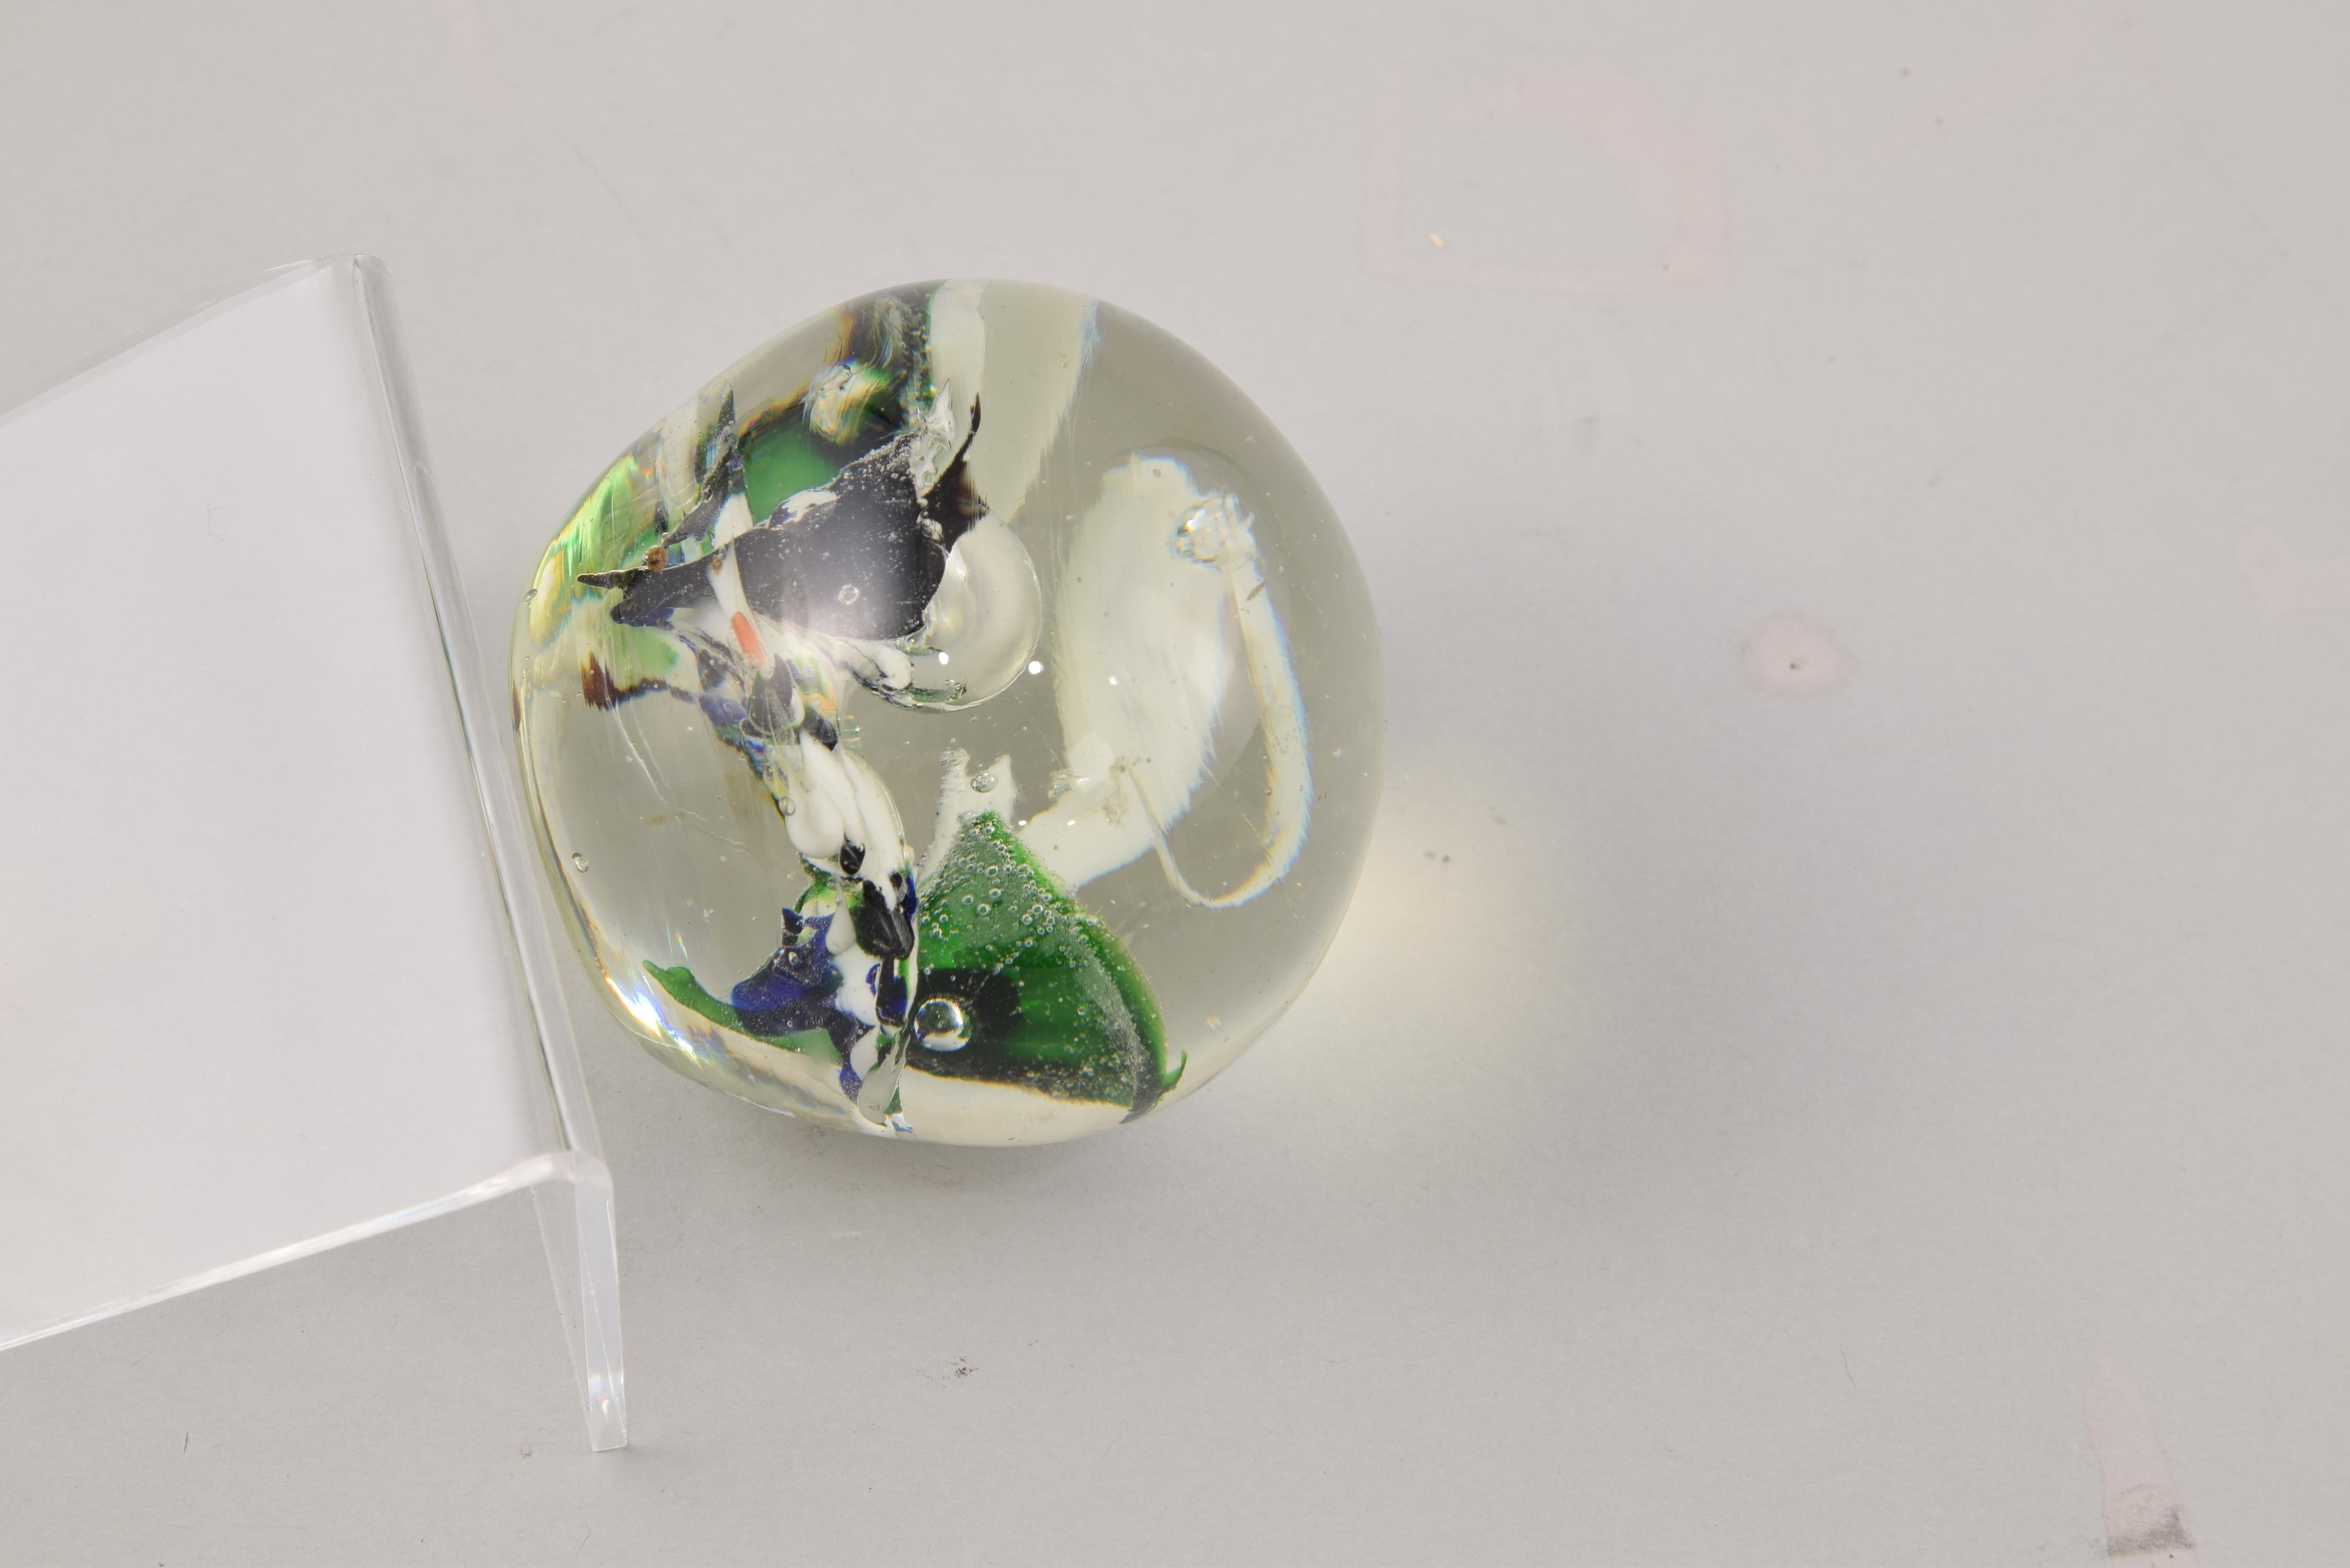 European Glass Paperweight 'Price Per Unit' For Sale